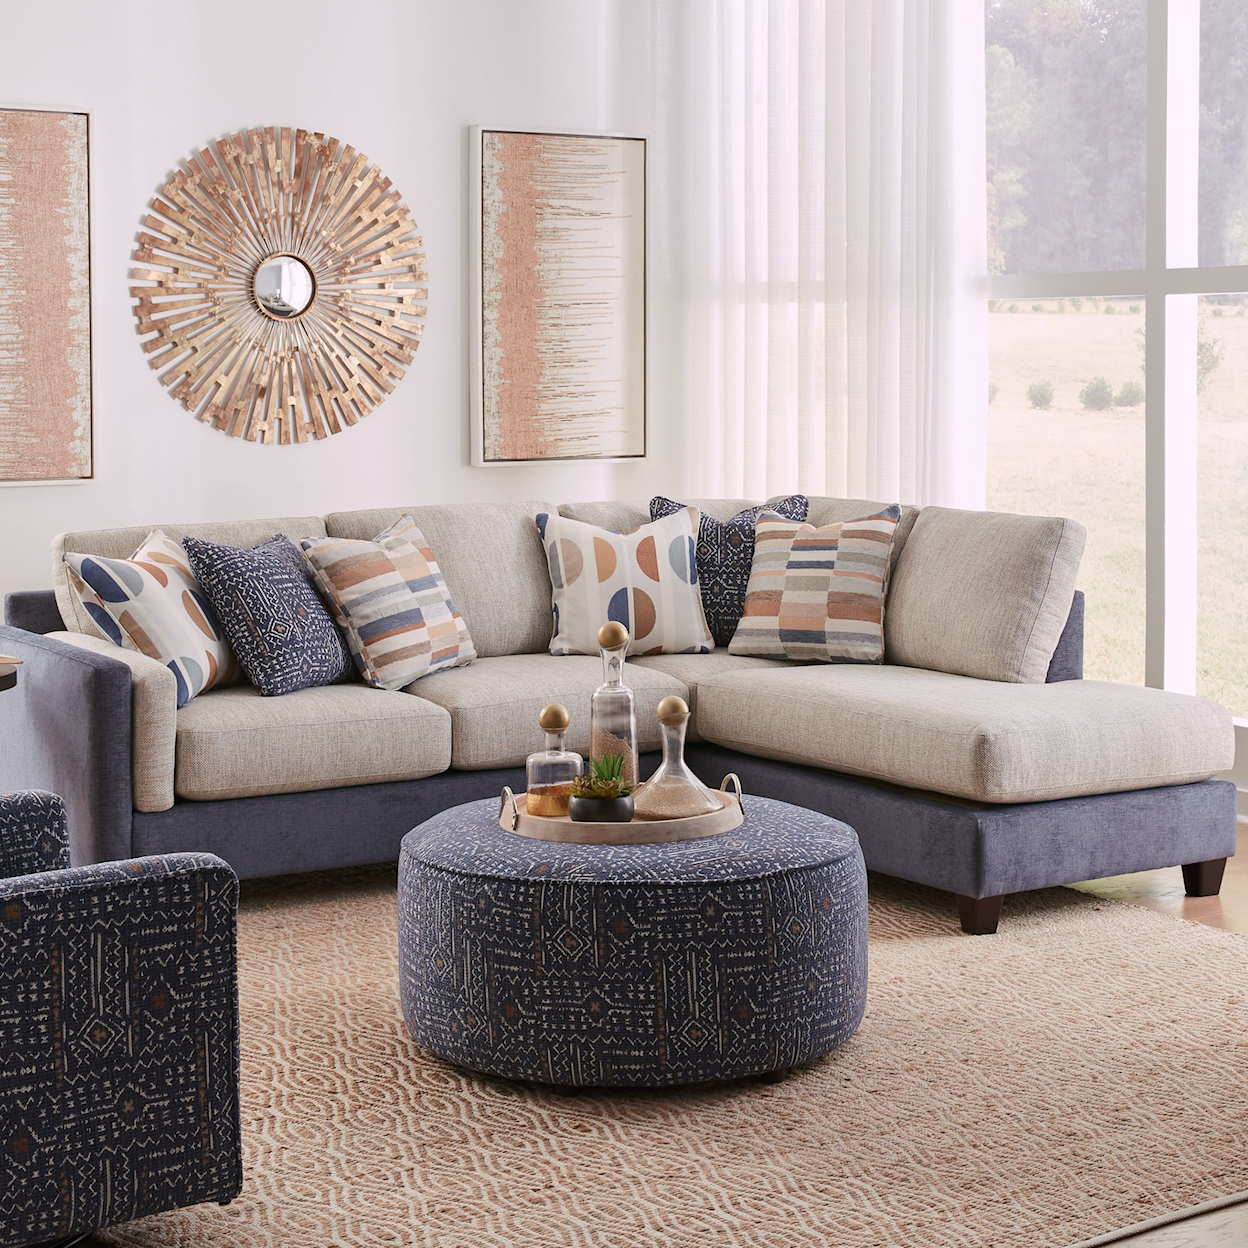 Fusion Furniture 5005 HERZL DENIM LOXLEY COCONUT Sectional Sofa